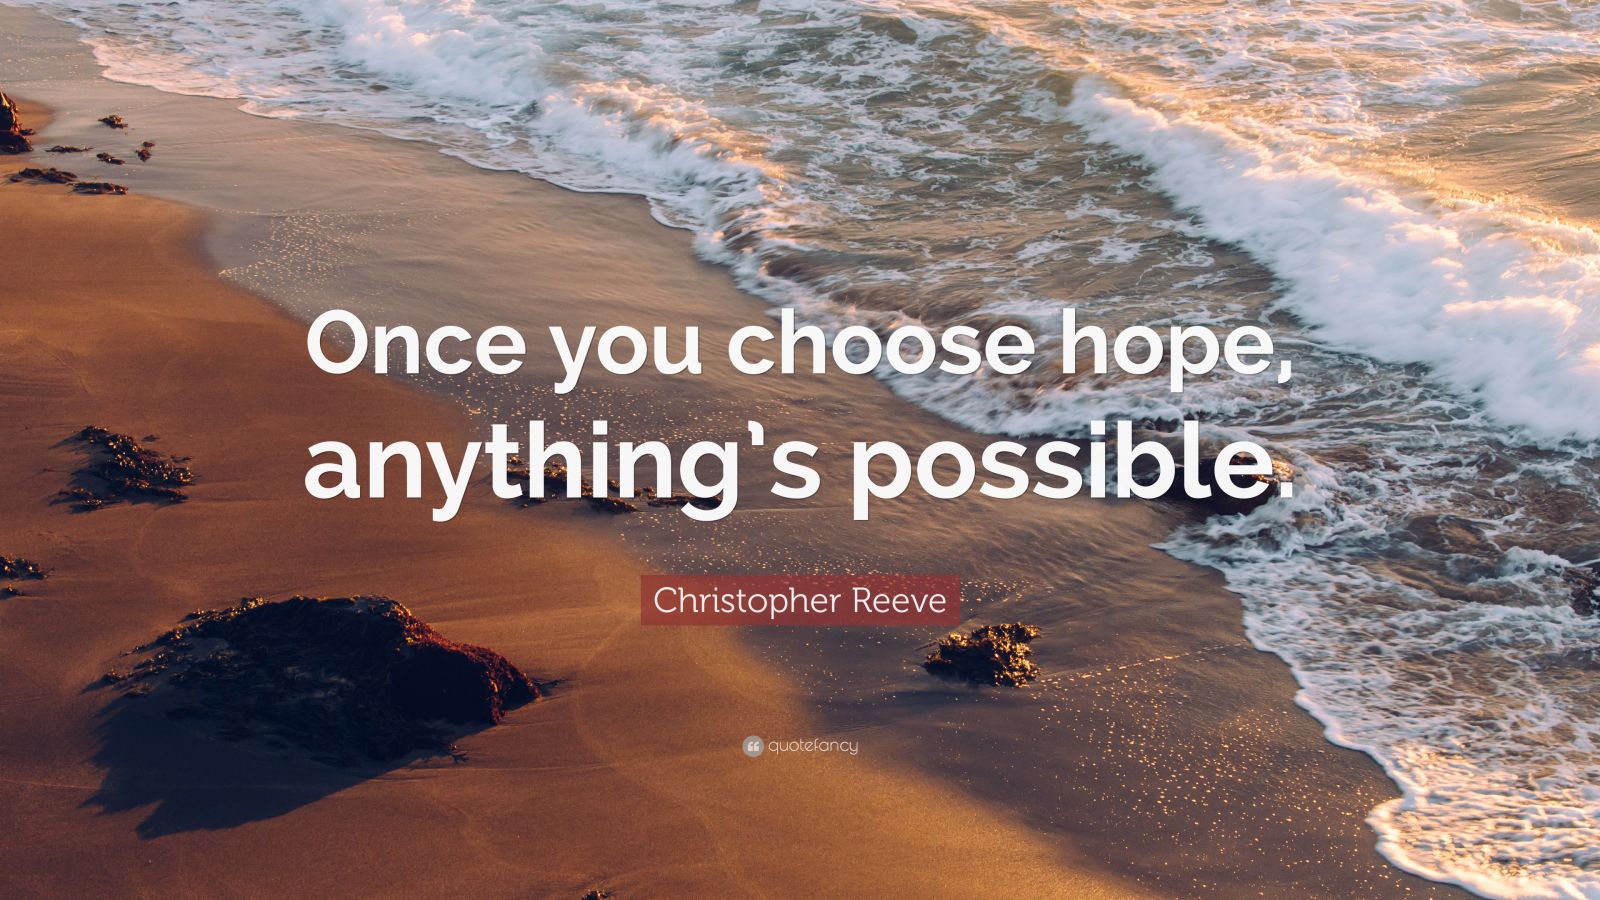 Christopher Reeve Quote: “Once you choose hope, anything’s possible ...